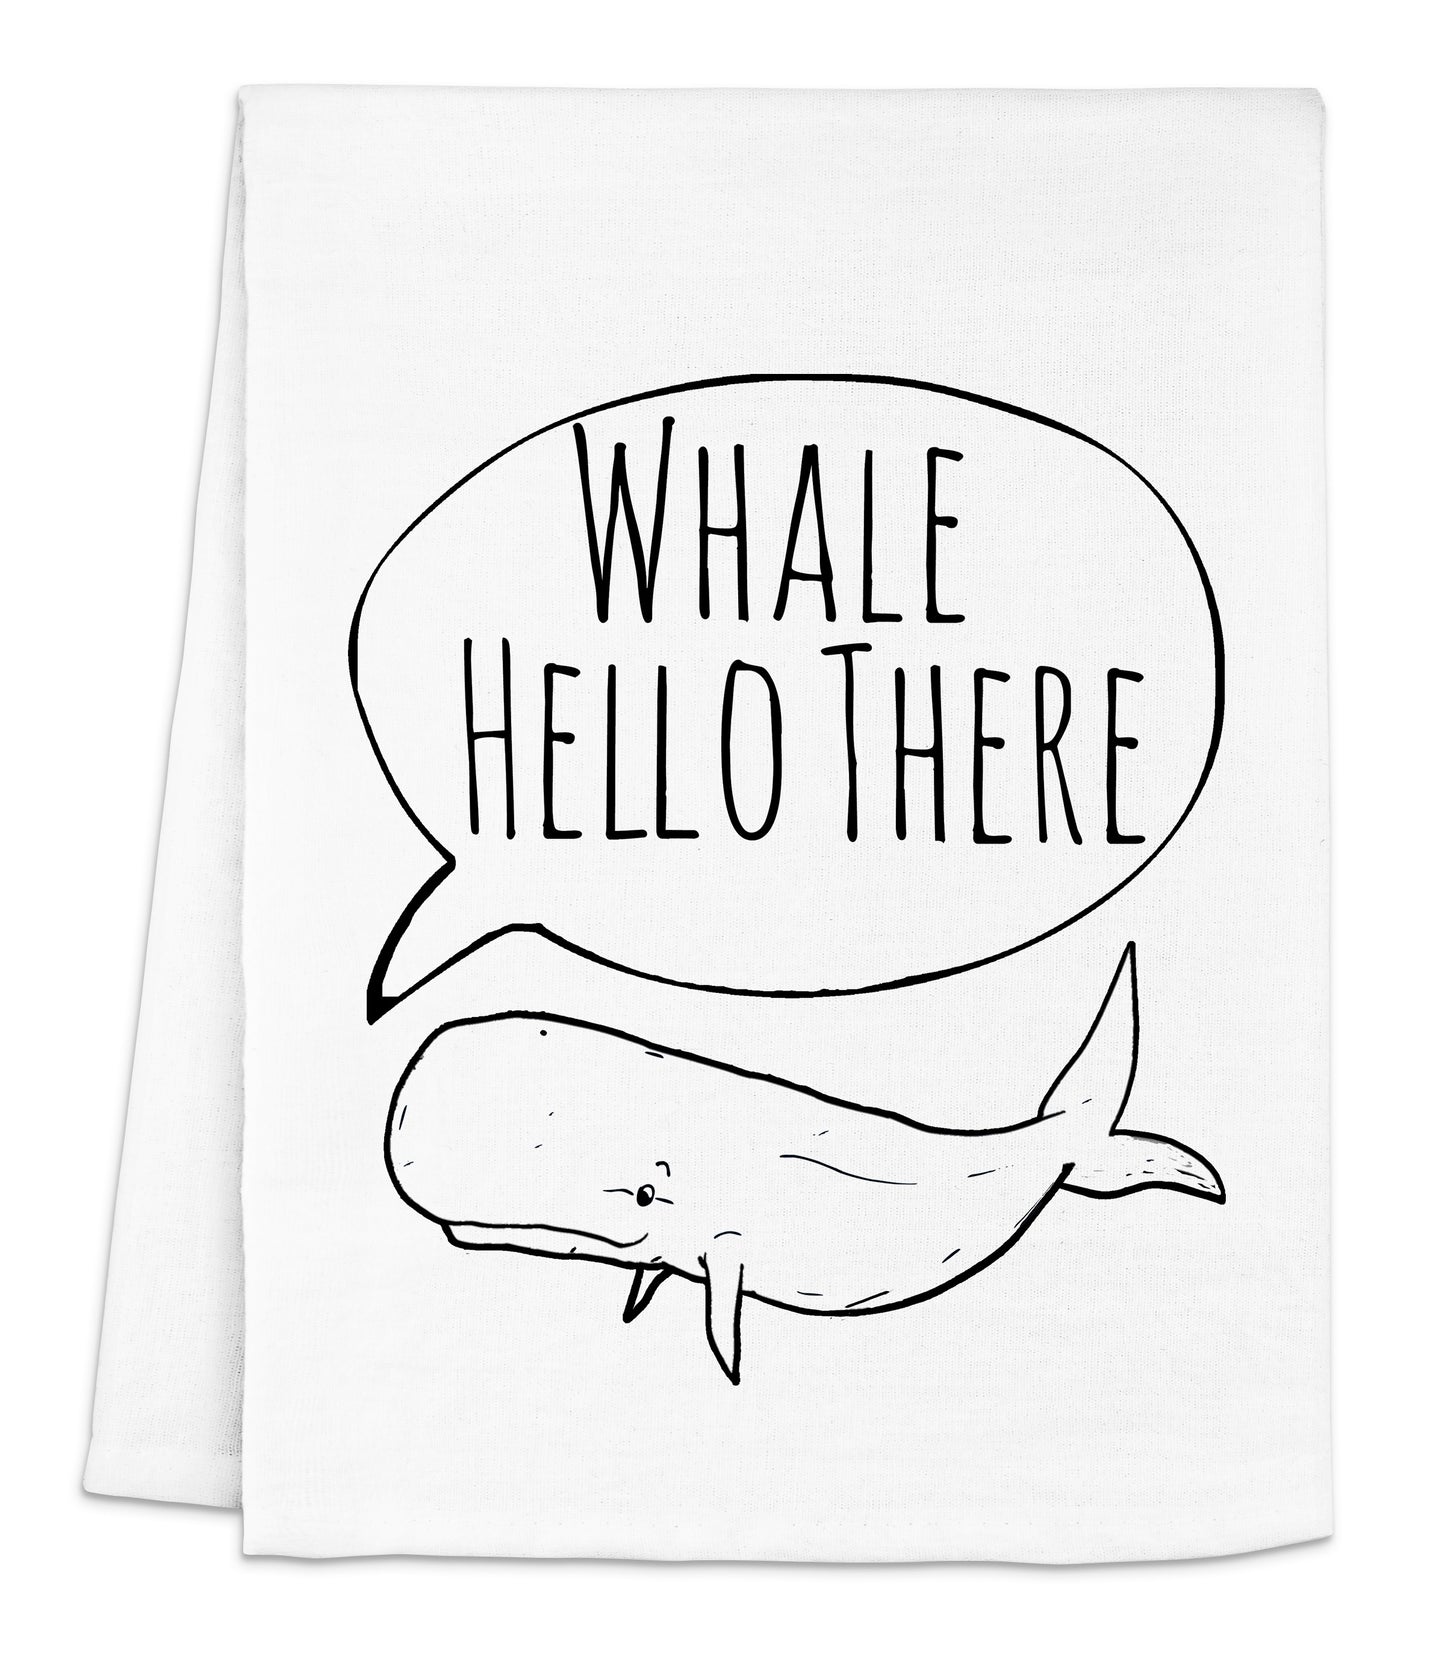 a black and white drawing of a whale with a speech bubble